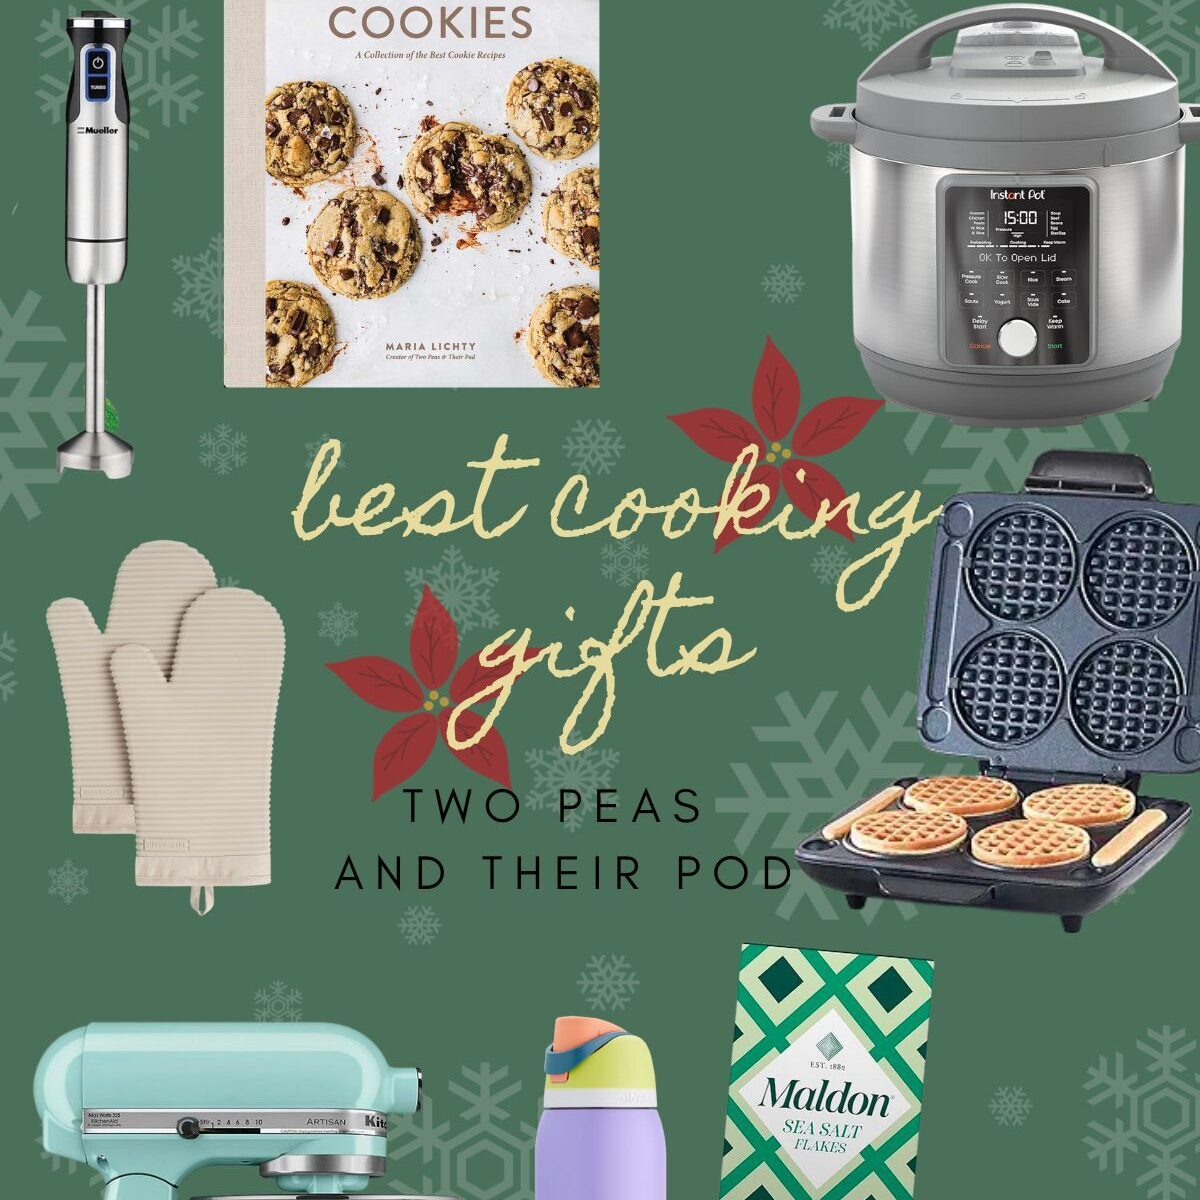 The 30 Best Cooking Gifts - Two Peas & Their Pod